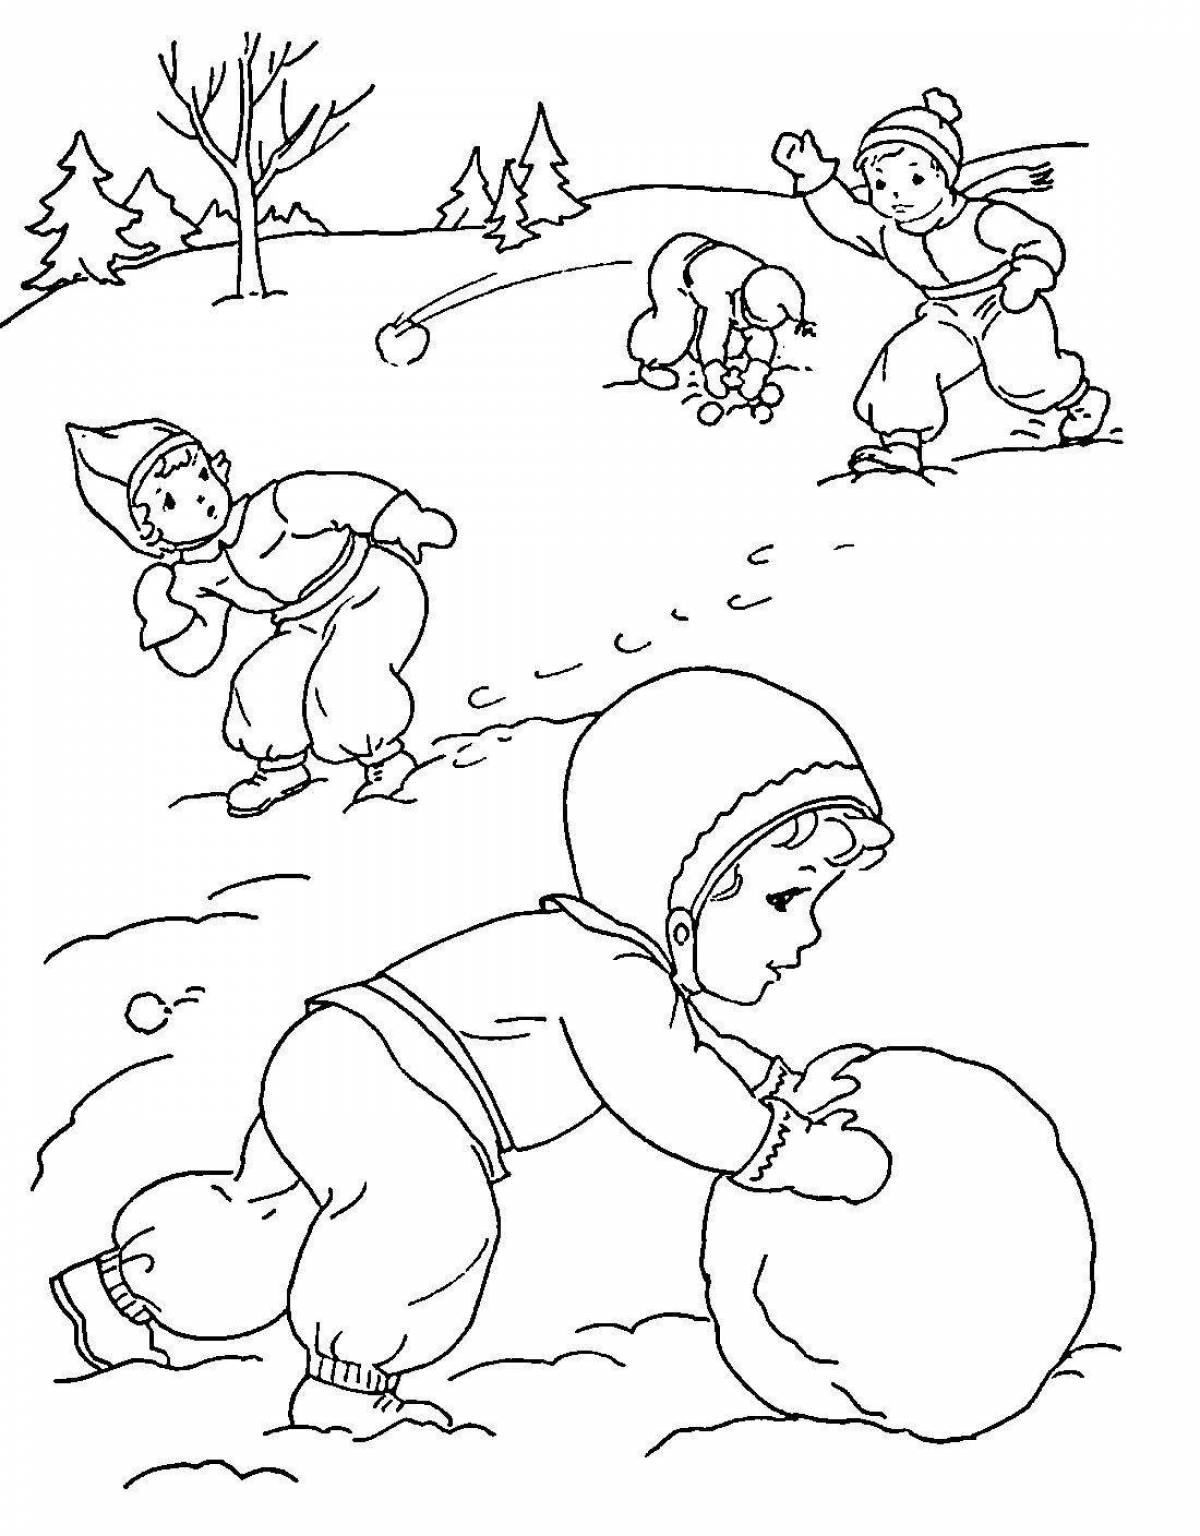 Exciting winter games for kids coloring book